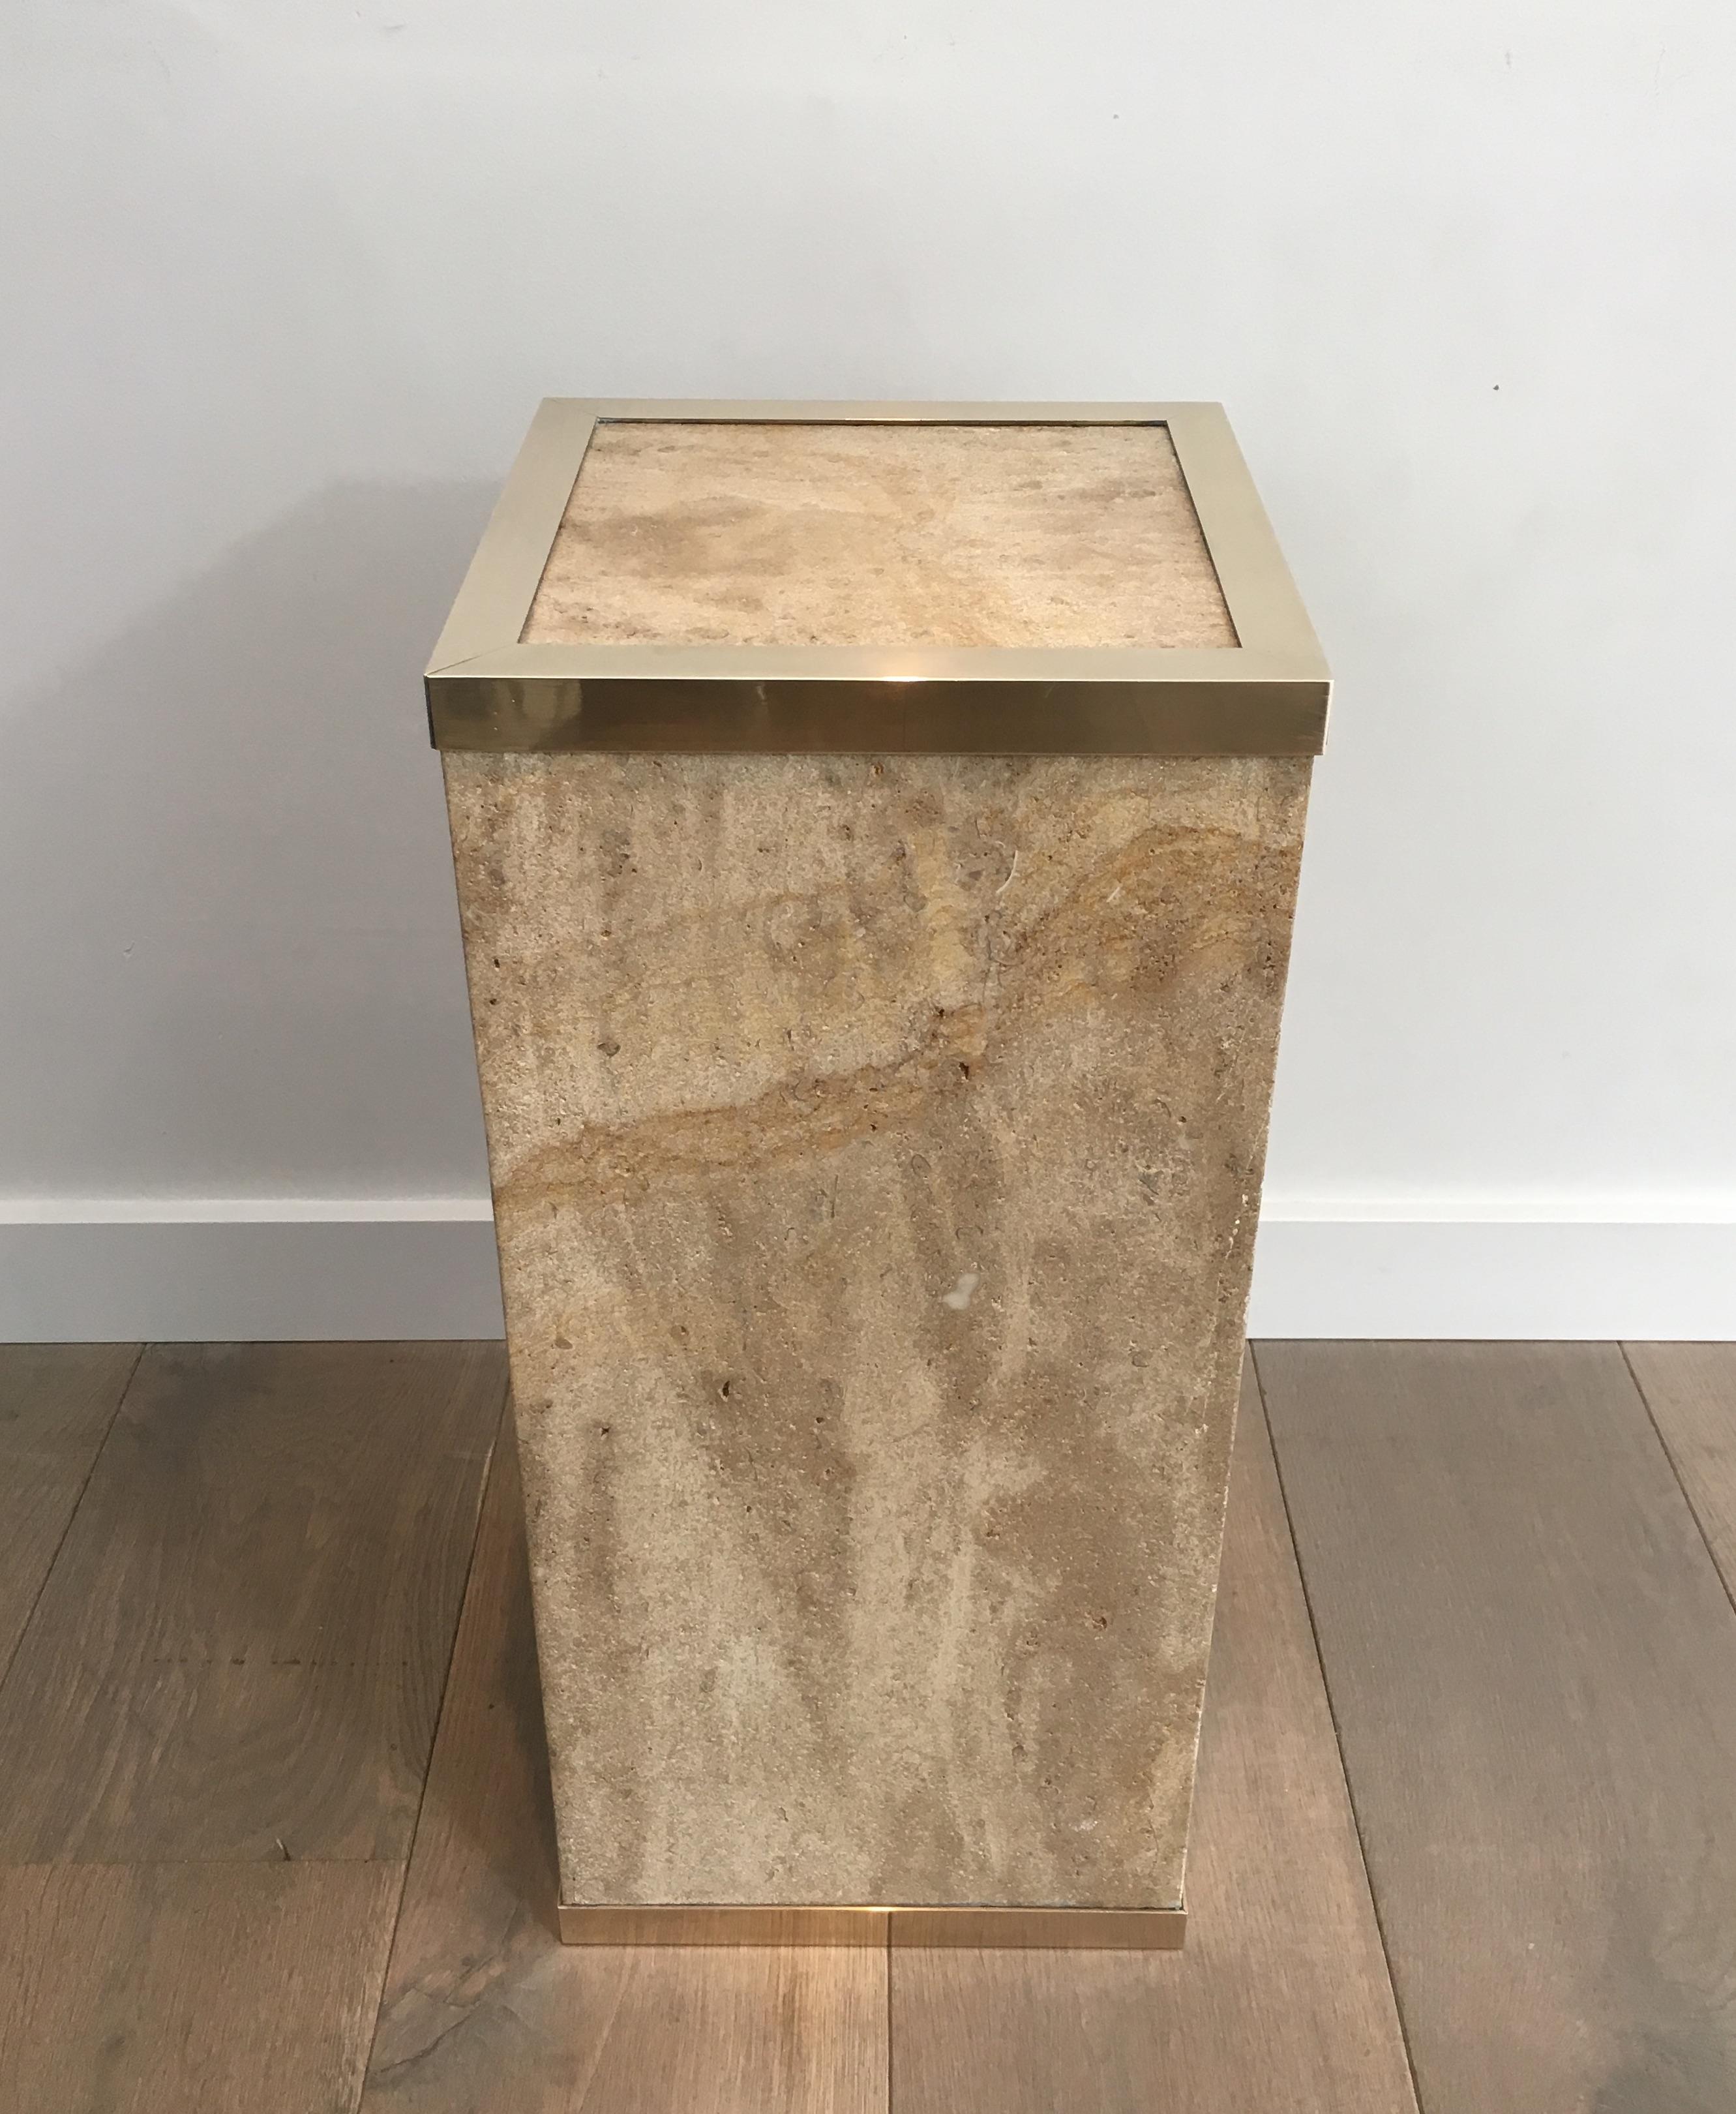 This nice rectangular column is made of travertine with a brass frame on top. This is a French work, circa 1970.